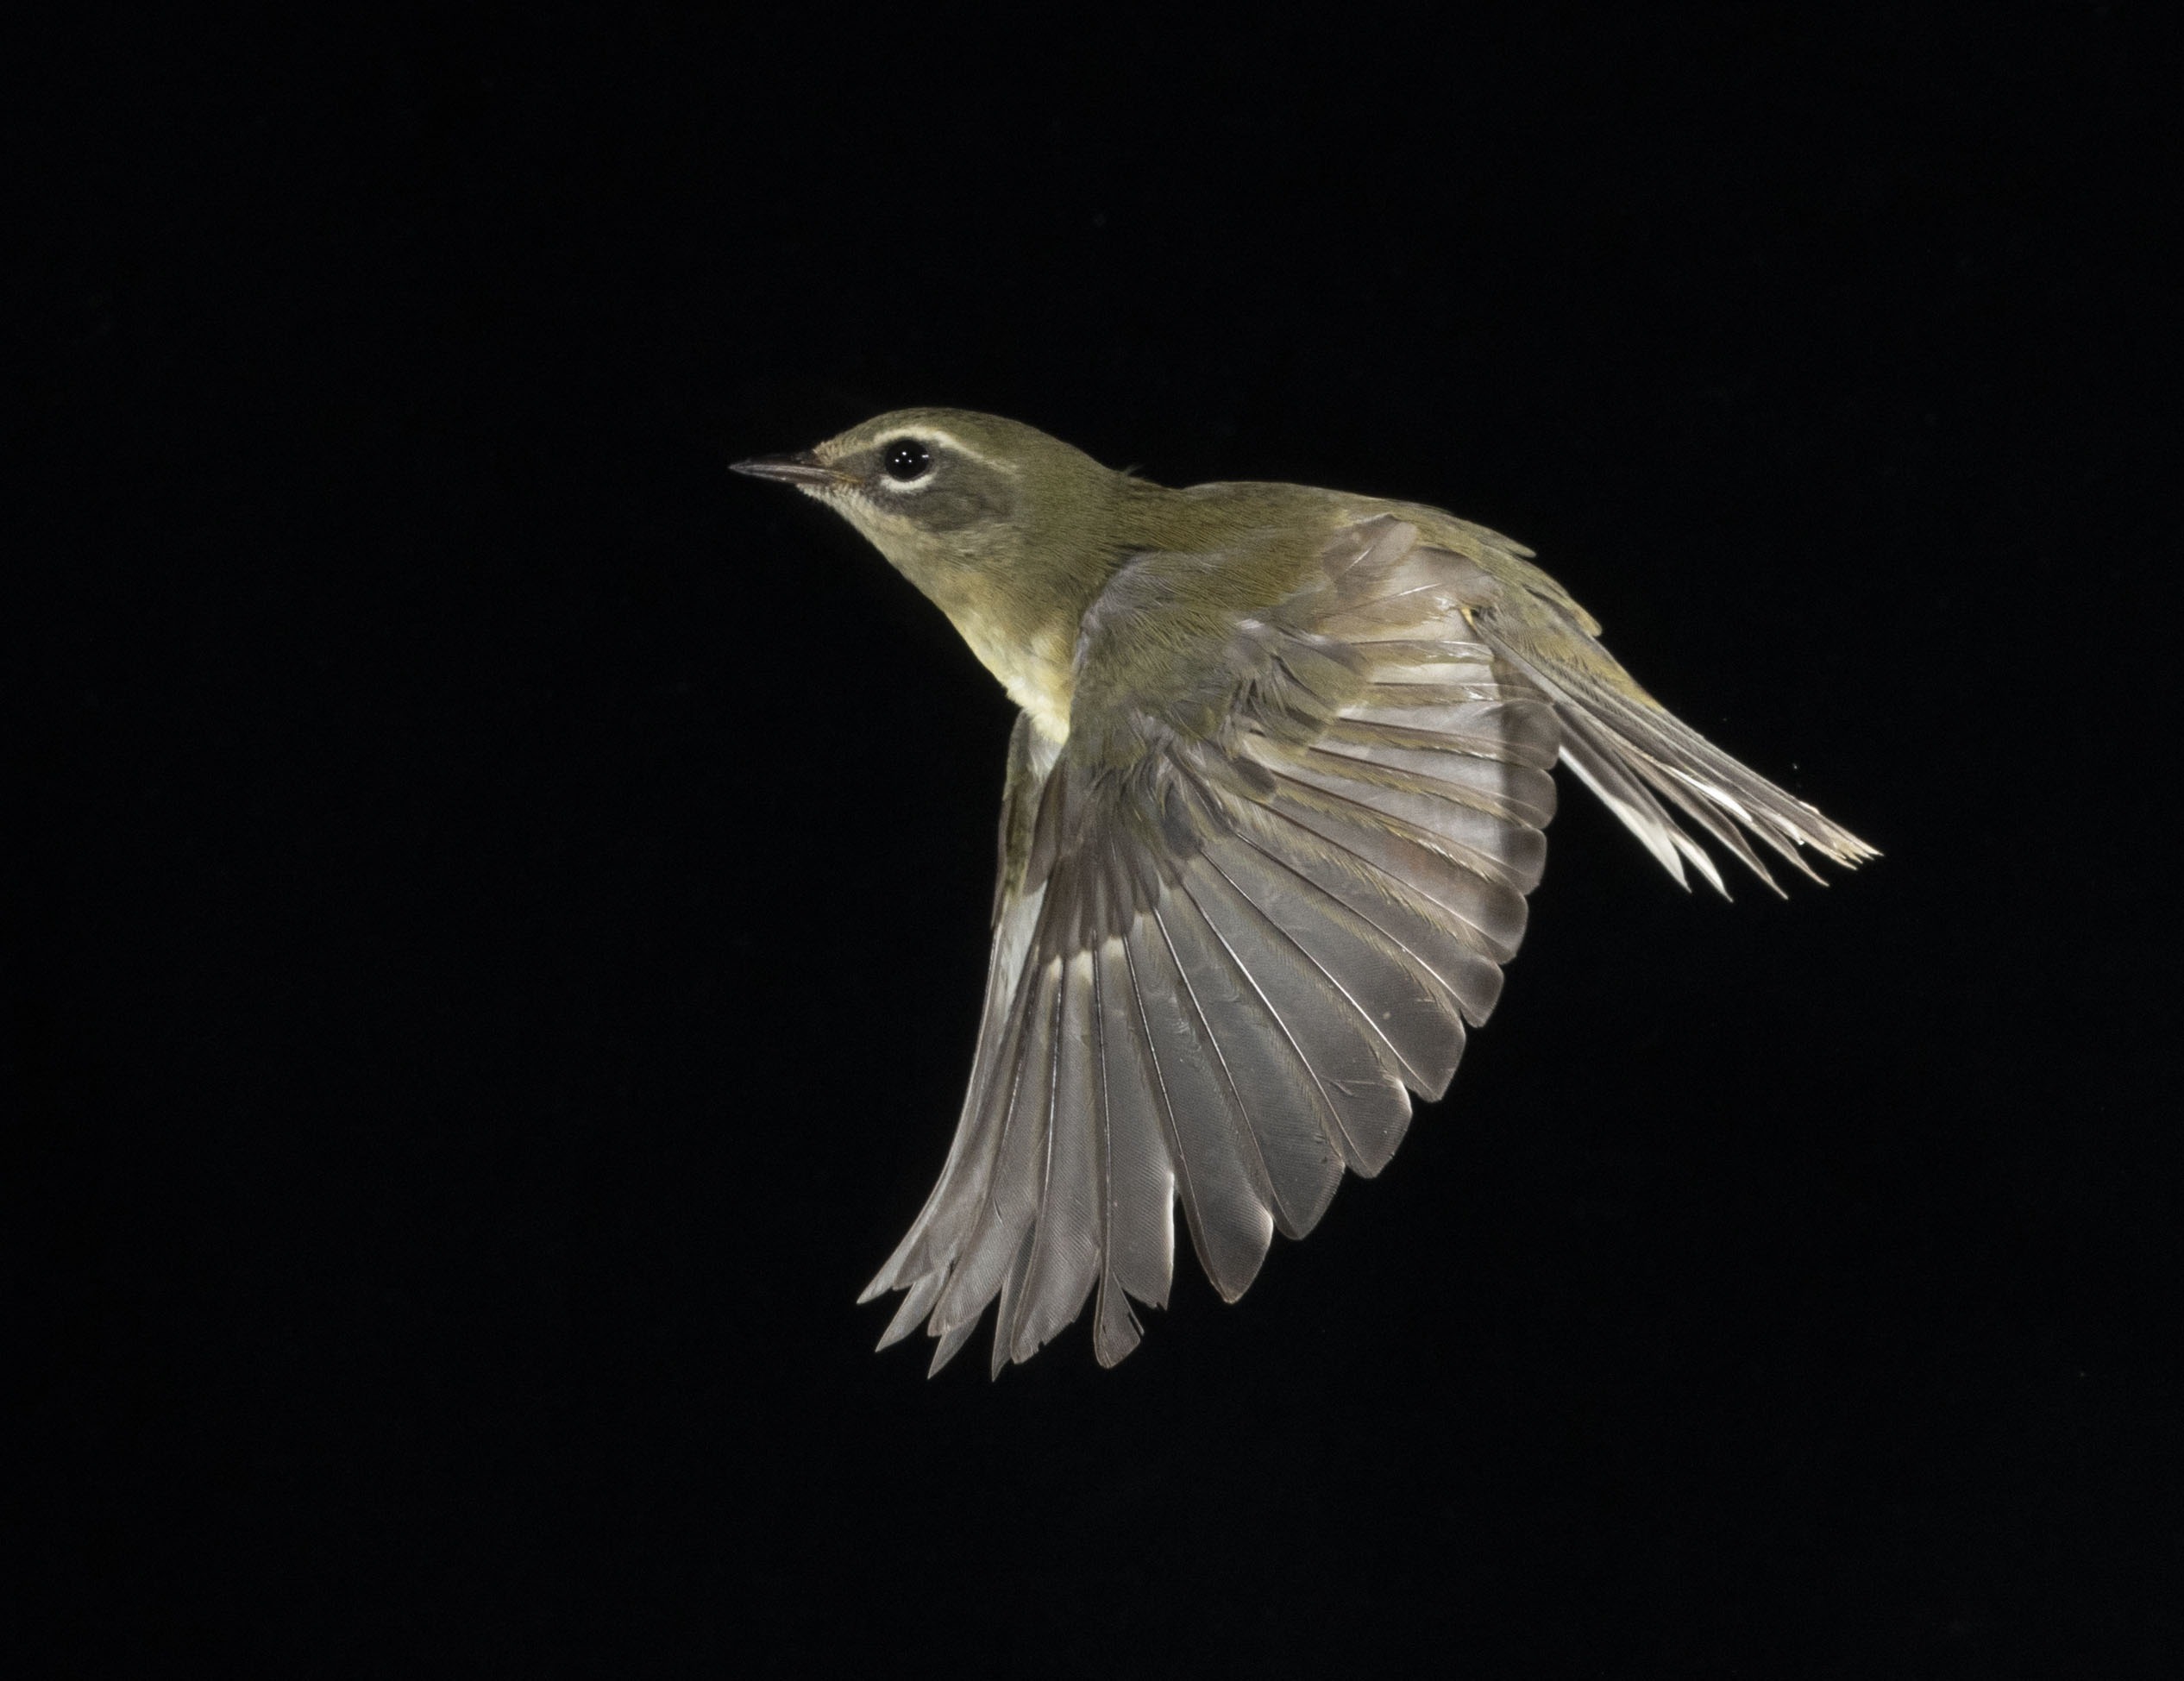 Black-throated Blue Warbler in flight with a black background